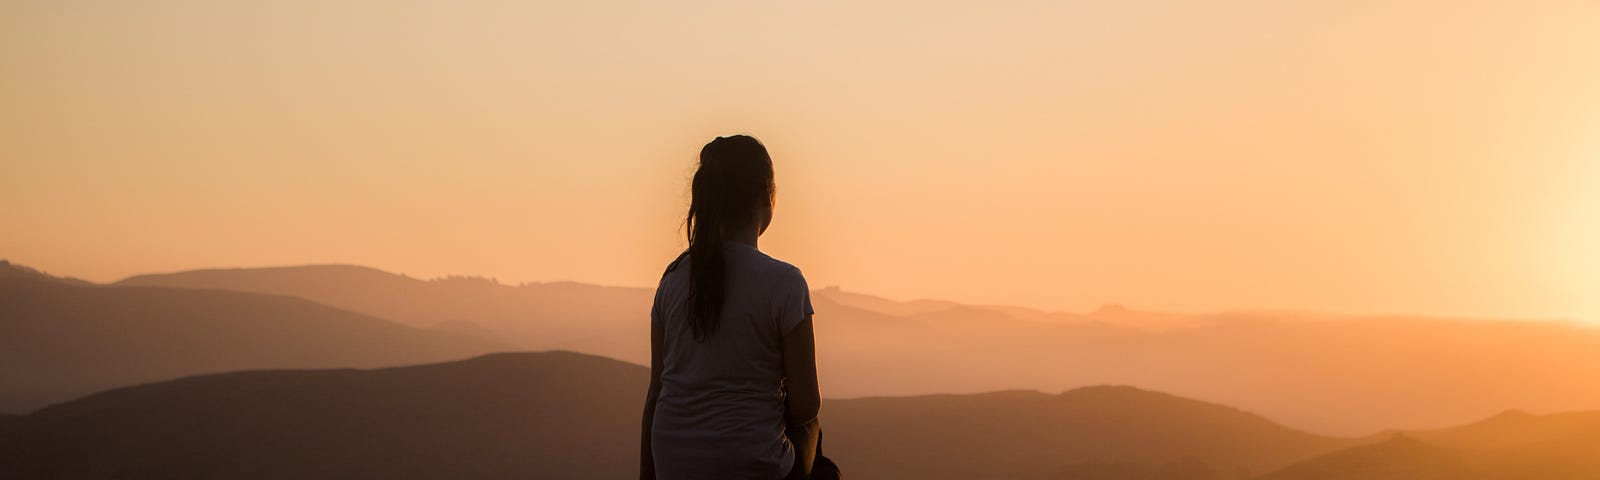 A picture of a young woman sitting on a bench and looking into the sunset in a beautiful mountainous area.